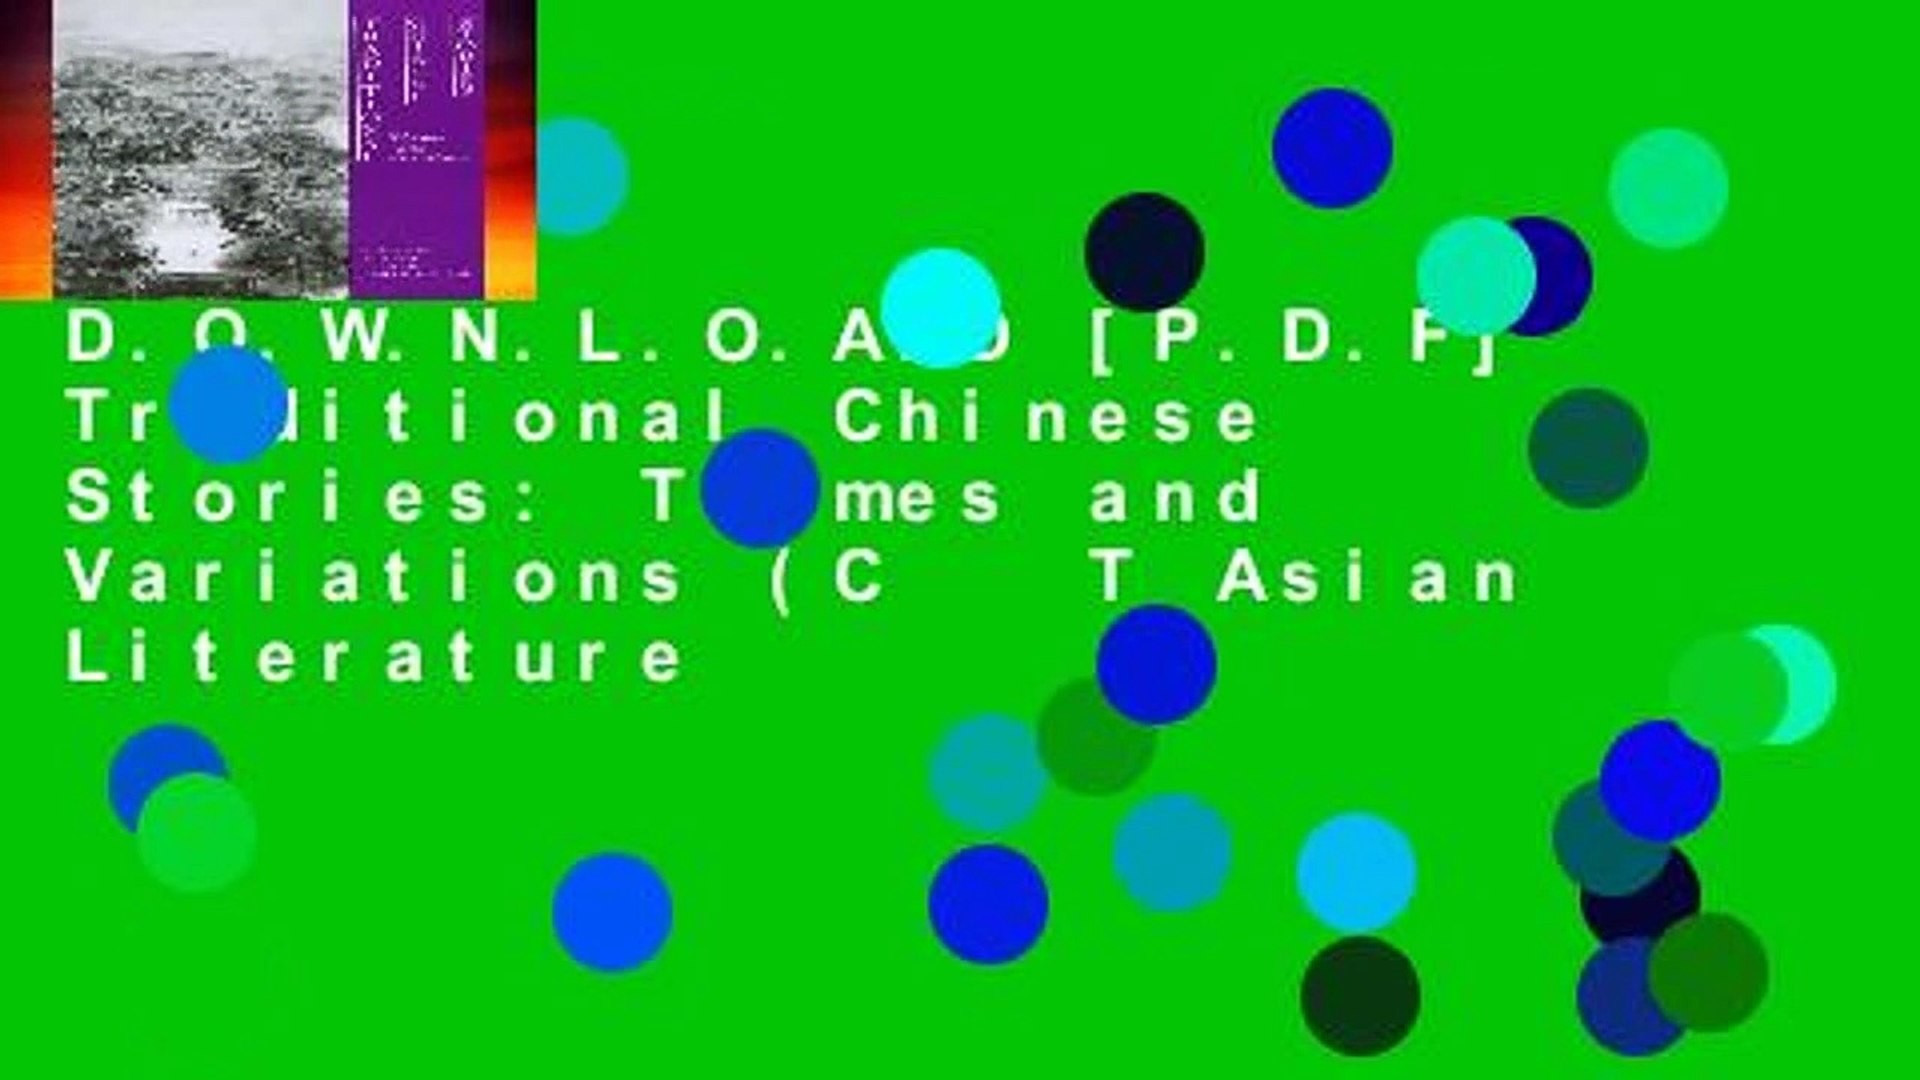 1920x1080 D.O.W.N.L.O.A.D [P.D.F] Traditional Chinese Stories: Themes and Variations  (C T Asian Literature